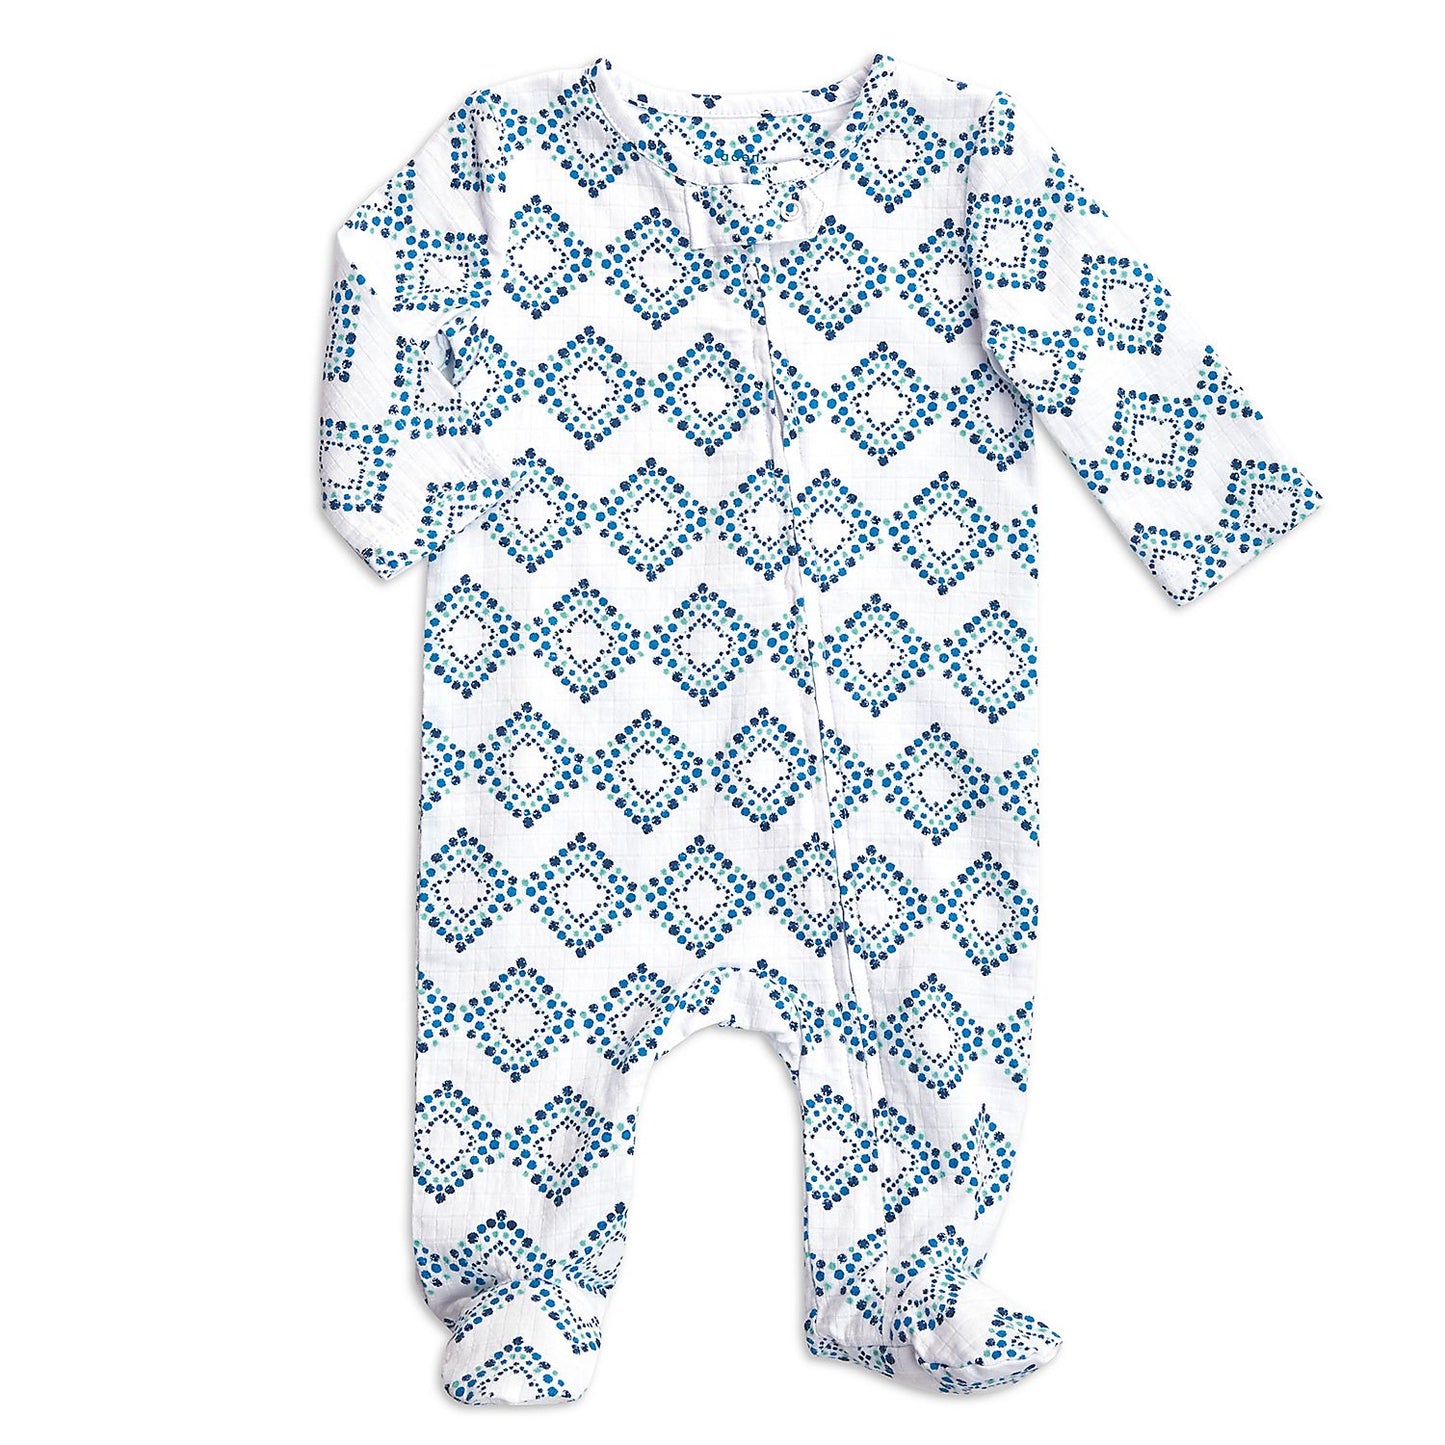 Aden and Anais Baby footed stretch cotton muslin Pajama - In turquoise stripe, faded navy blue X's, blue diamond print or pink small floral vine print